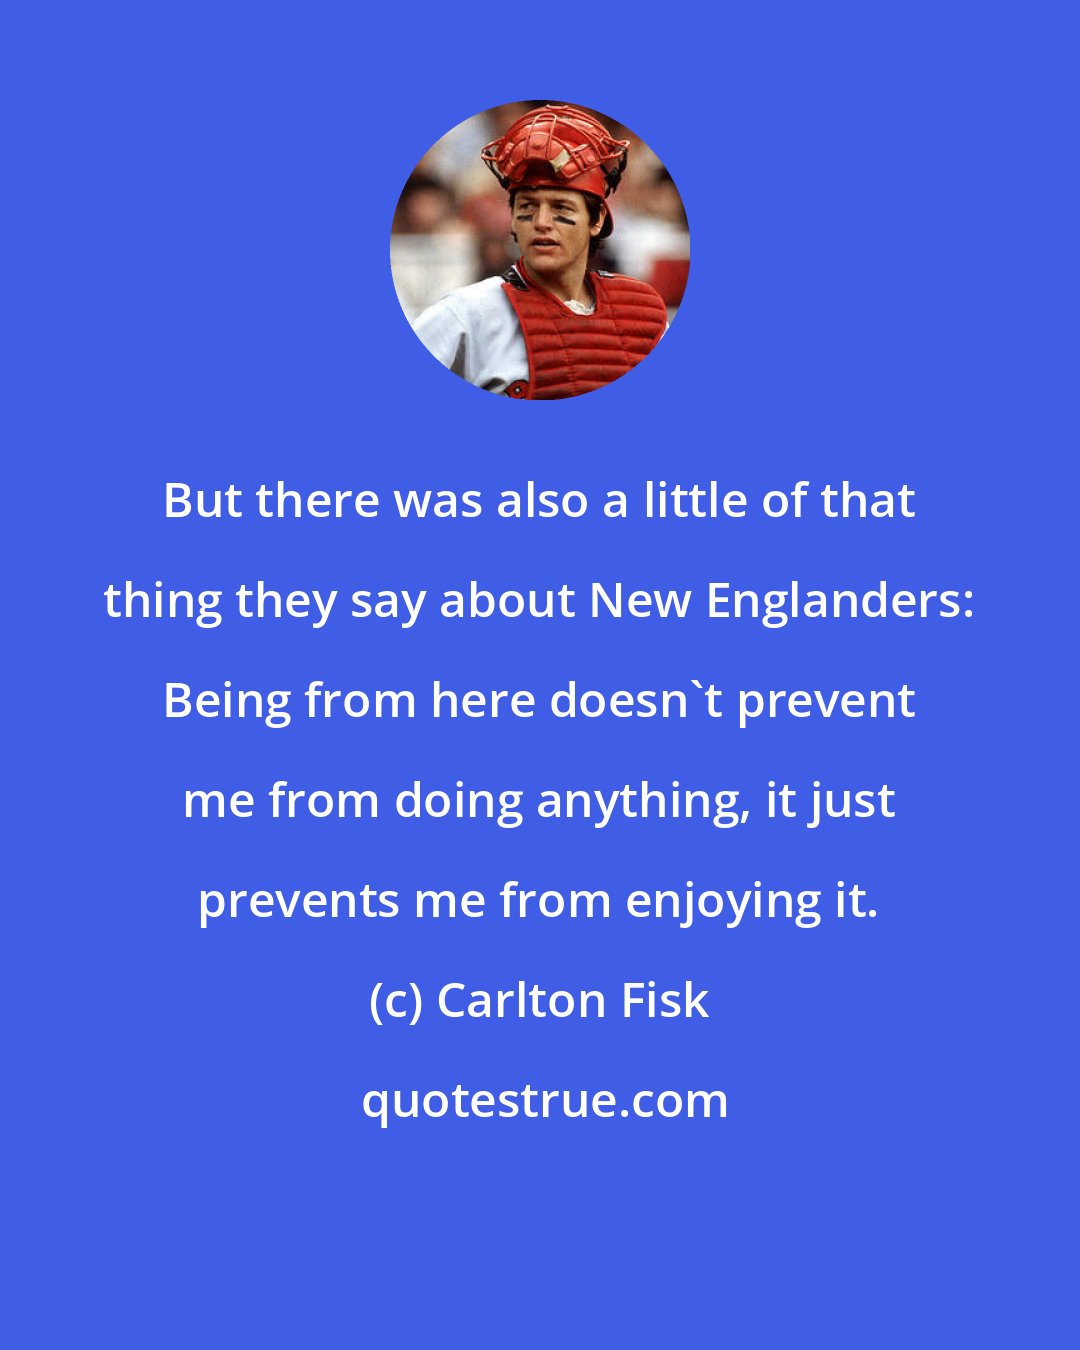 Carlton Fisk: But there was also a little of that thing they say about New Englanders: Being from here doesn't prevent me from doing anything, it just prevents me from enjoying it.